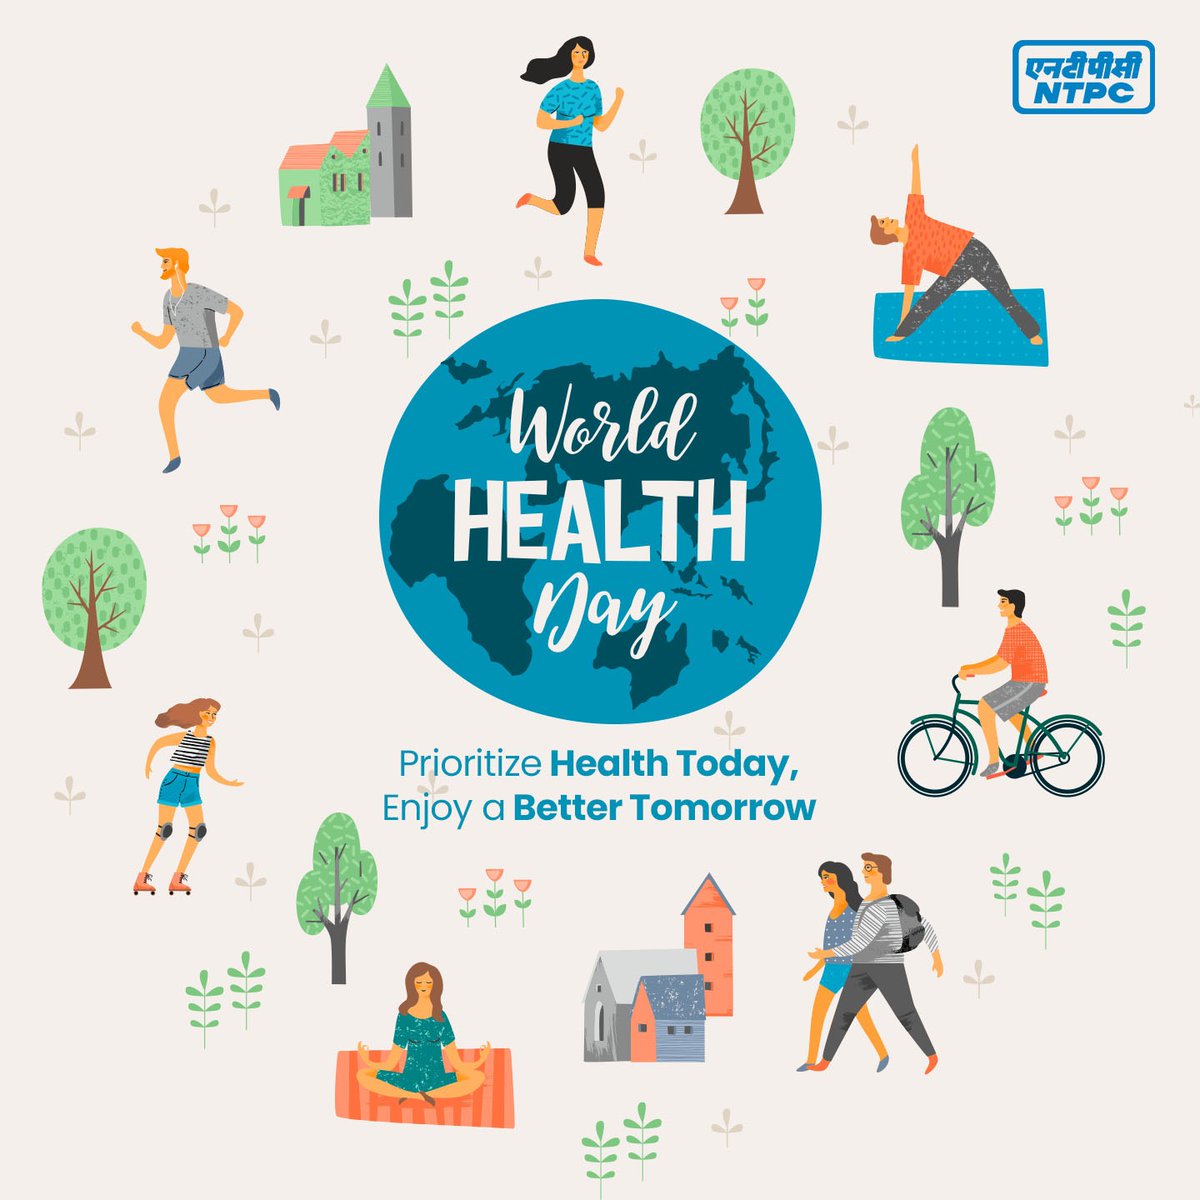 This World Health Day, NTPC reaffirms its commitment to prioritize well-being for a healthier future. Through a spectrum of health programs and community outreach, we are dedicated to foster a brighter tomorrow for all. #WorldHealthDay #MyHealthMyRight #HealthForAll